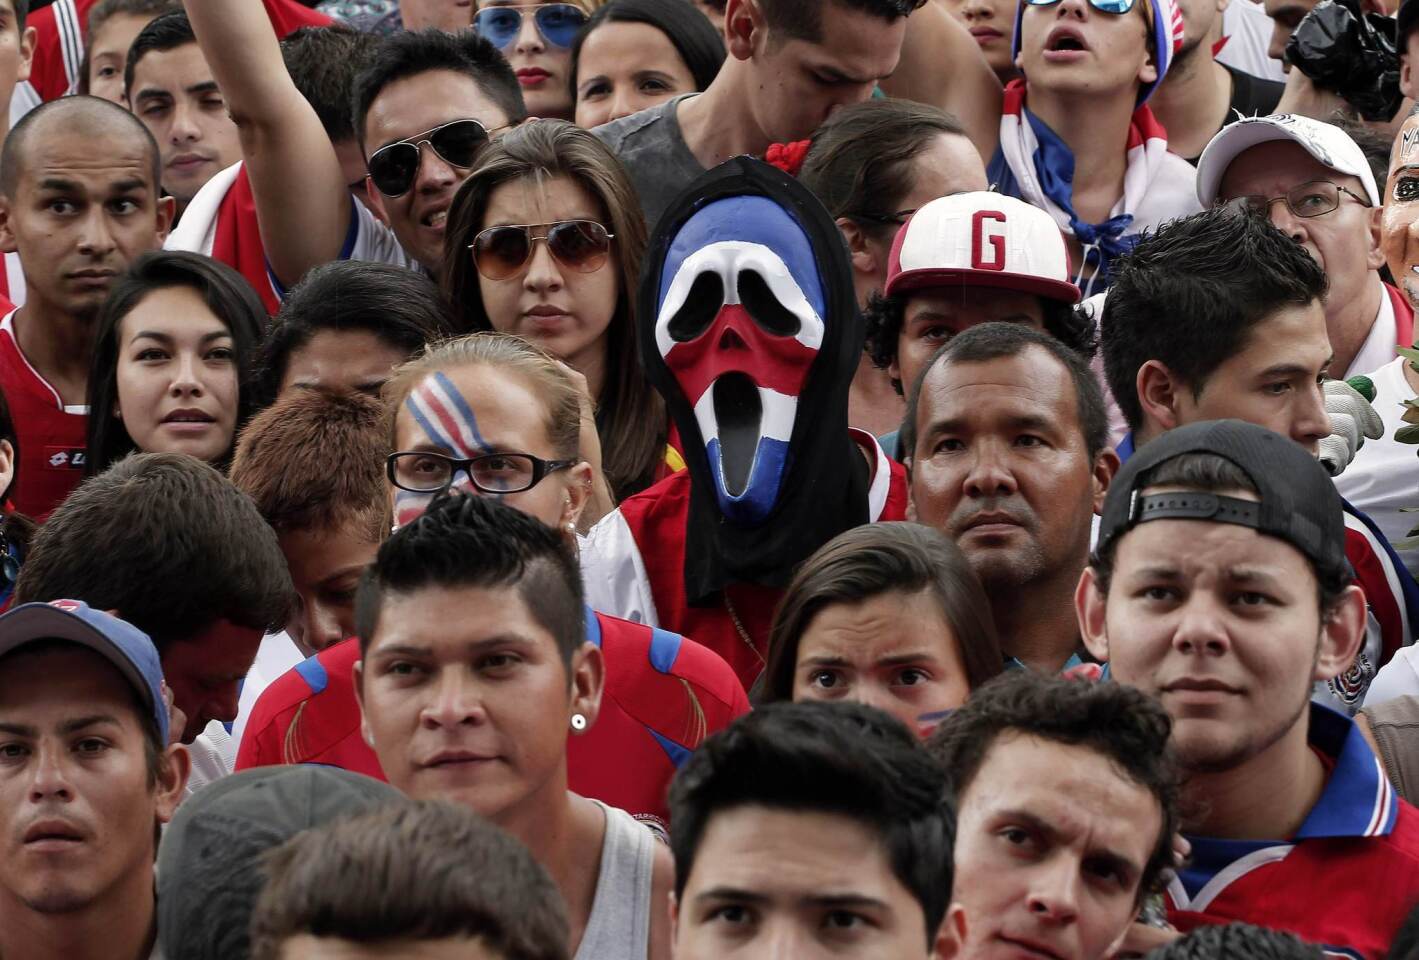 Fans of Costa Rica watch a broadcast of the 2014 World Cup round of 16 game between Costa Rica and Greece, in San Jose